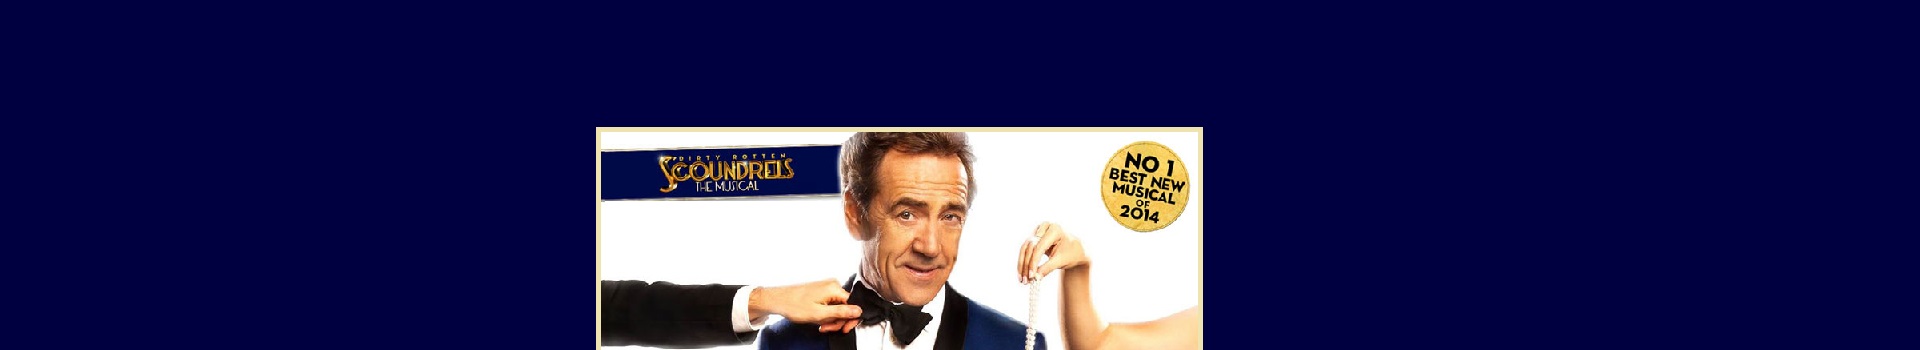 Dirty Rotten Scoundrels banner image